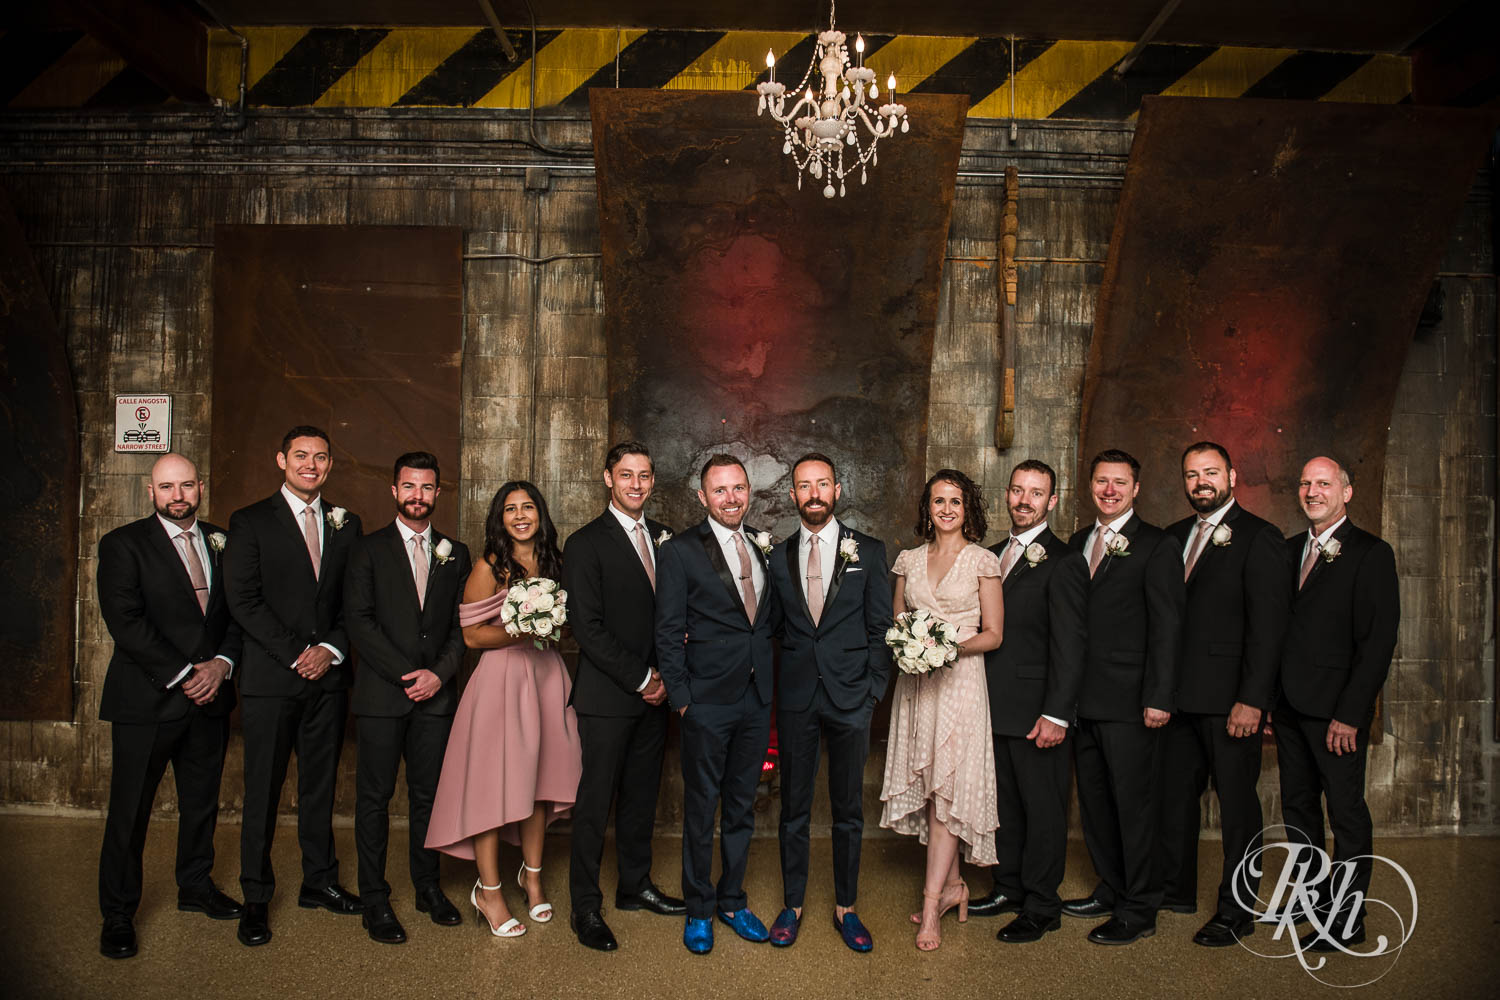 Grooms smile with wedding party at Warehouse Winery wedding in Saint Louis Park, Minnesota.